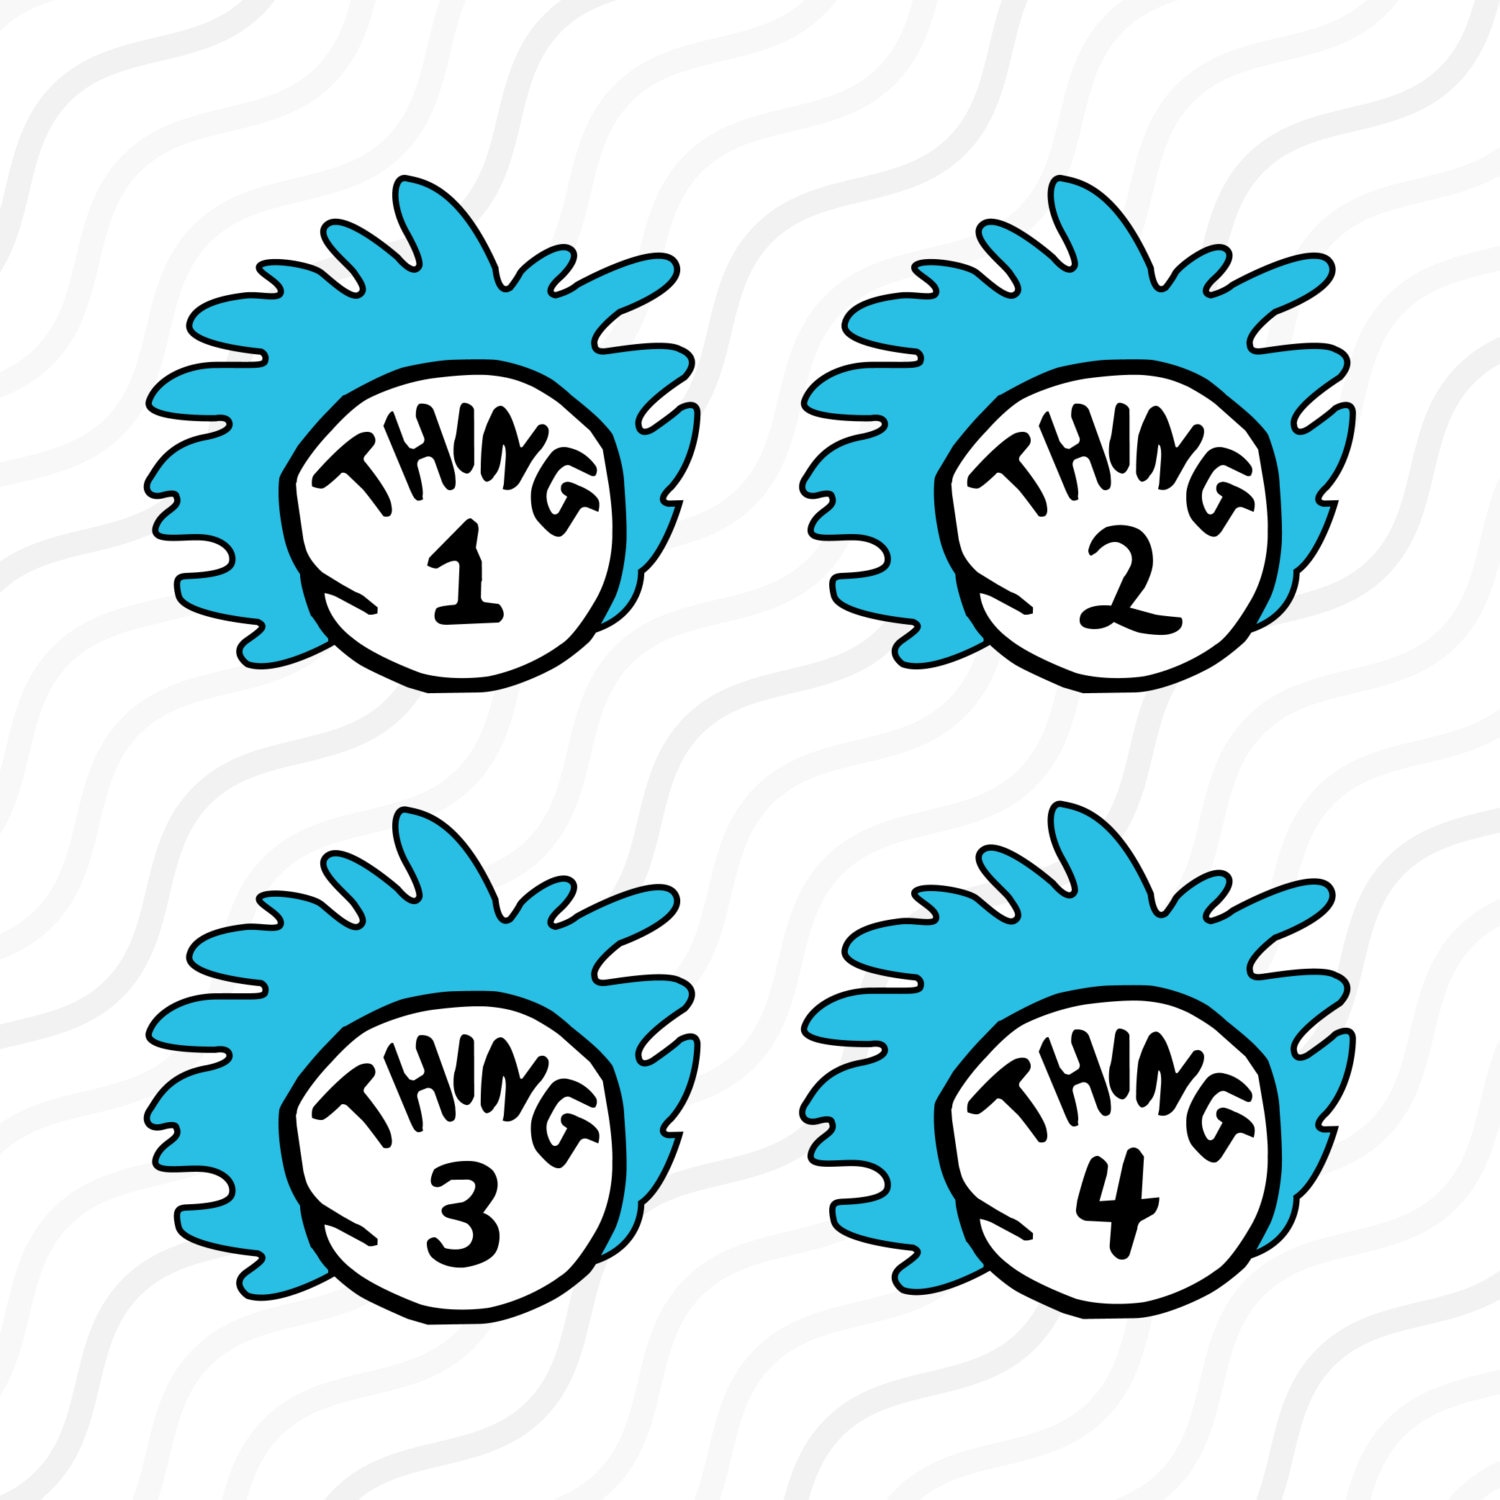 Download Thing 1 2 3 and 4 SVG Cut table by svgsilhouettecuts on Etsy